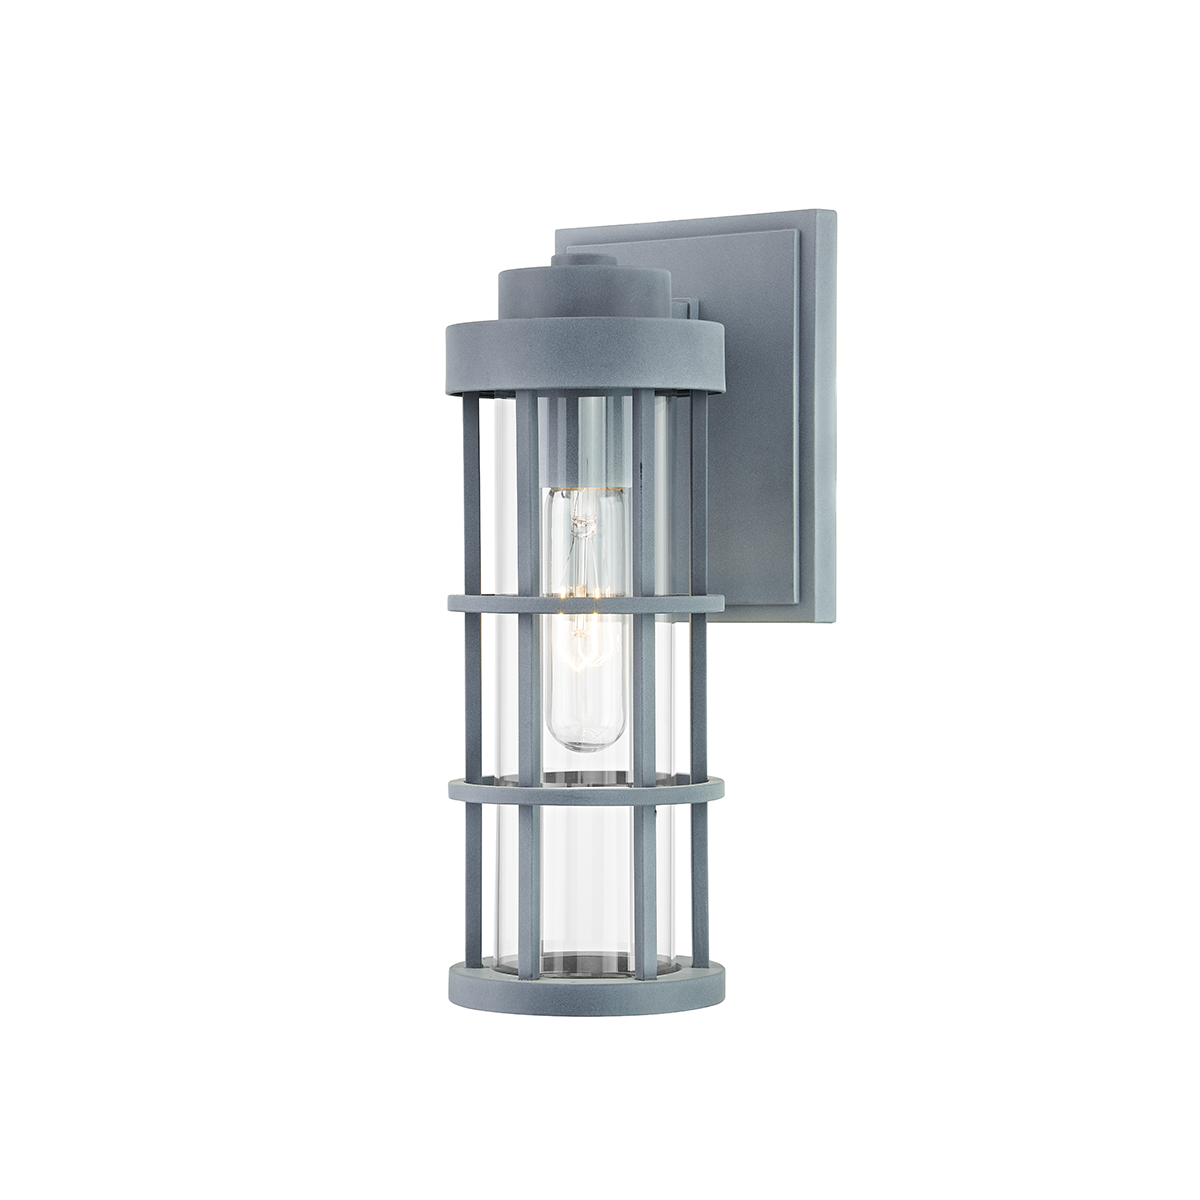 Troy Lighting 1 LIGHT SMALL EXTERIOR WALL SCONCE B2041 Outdoor l Wall Troy Lighting WEATHERED ZINC  